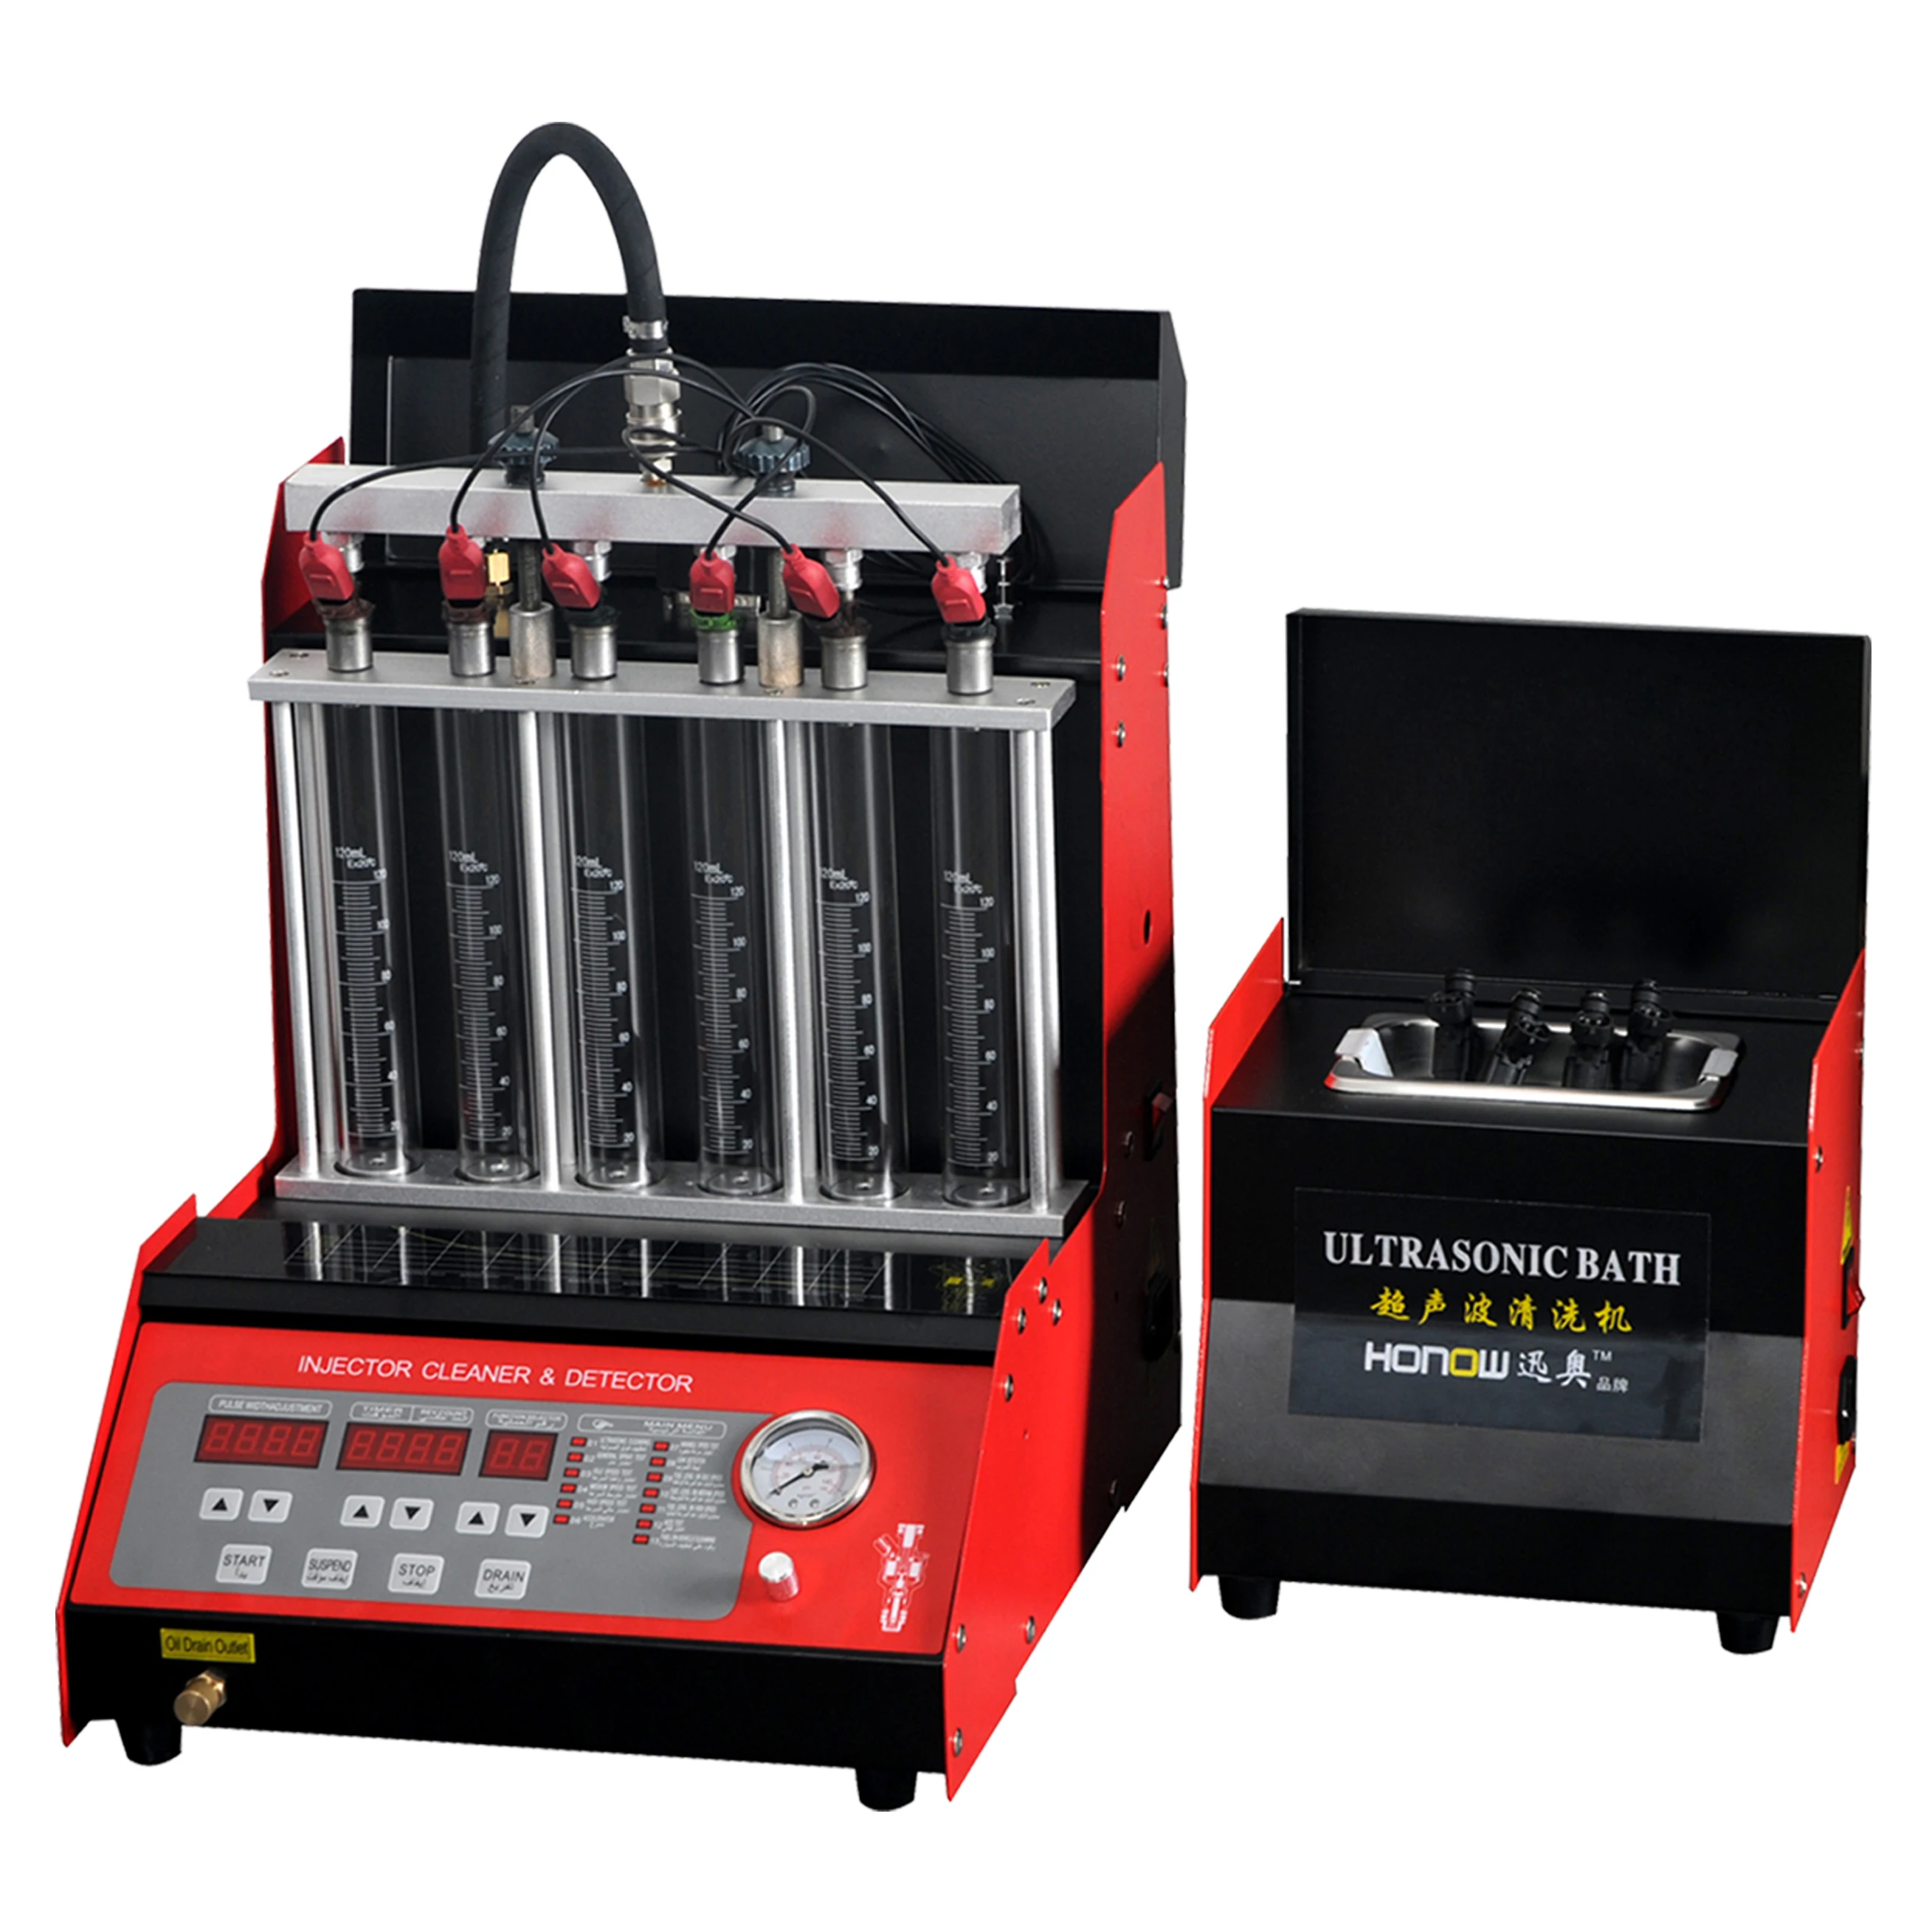 

HO-6C Automotive Fuel Injectors Tester & Cleaner 220V/110V With English/Arabic Panel For 6 Or 4 Or 2 Gasoline Injectors